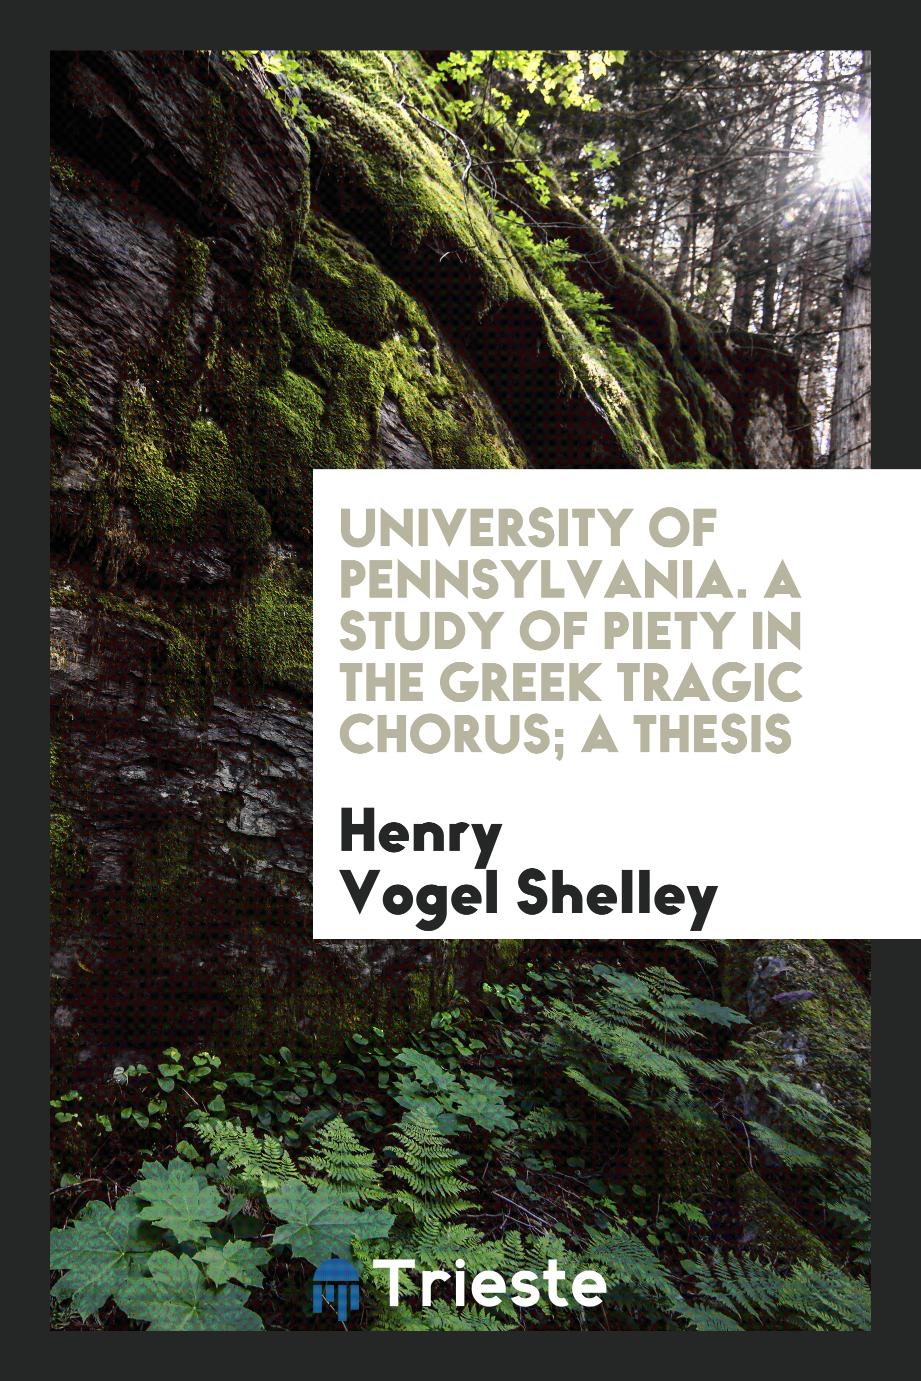 University of Pennsylvania. A Study of Piety in the Greek Tragic Chorus; a thesis